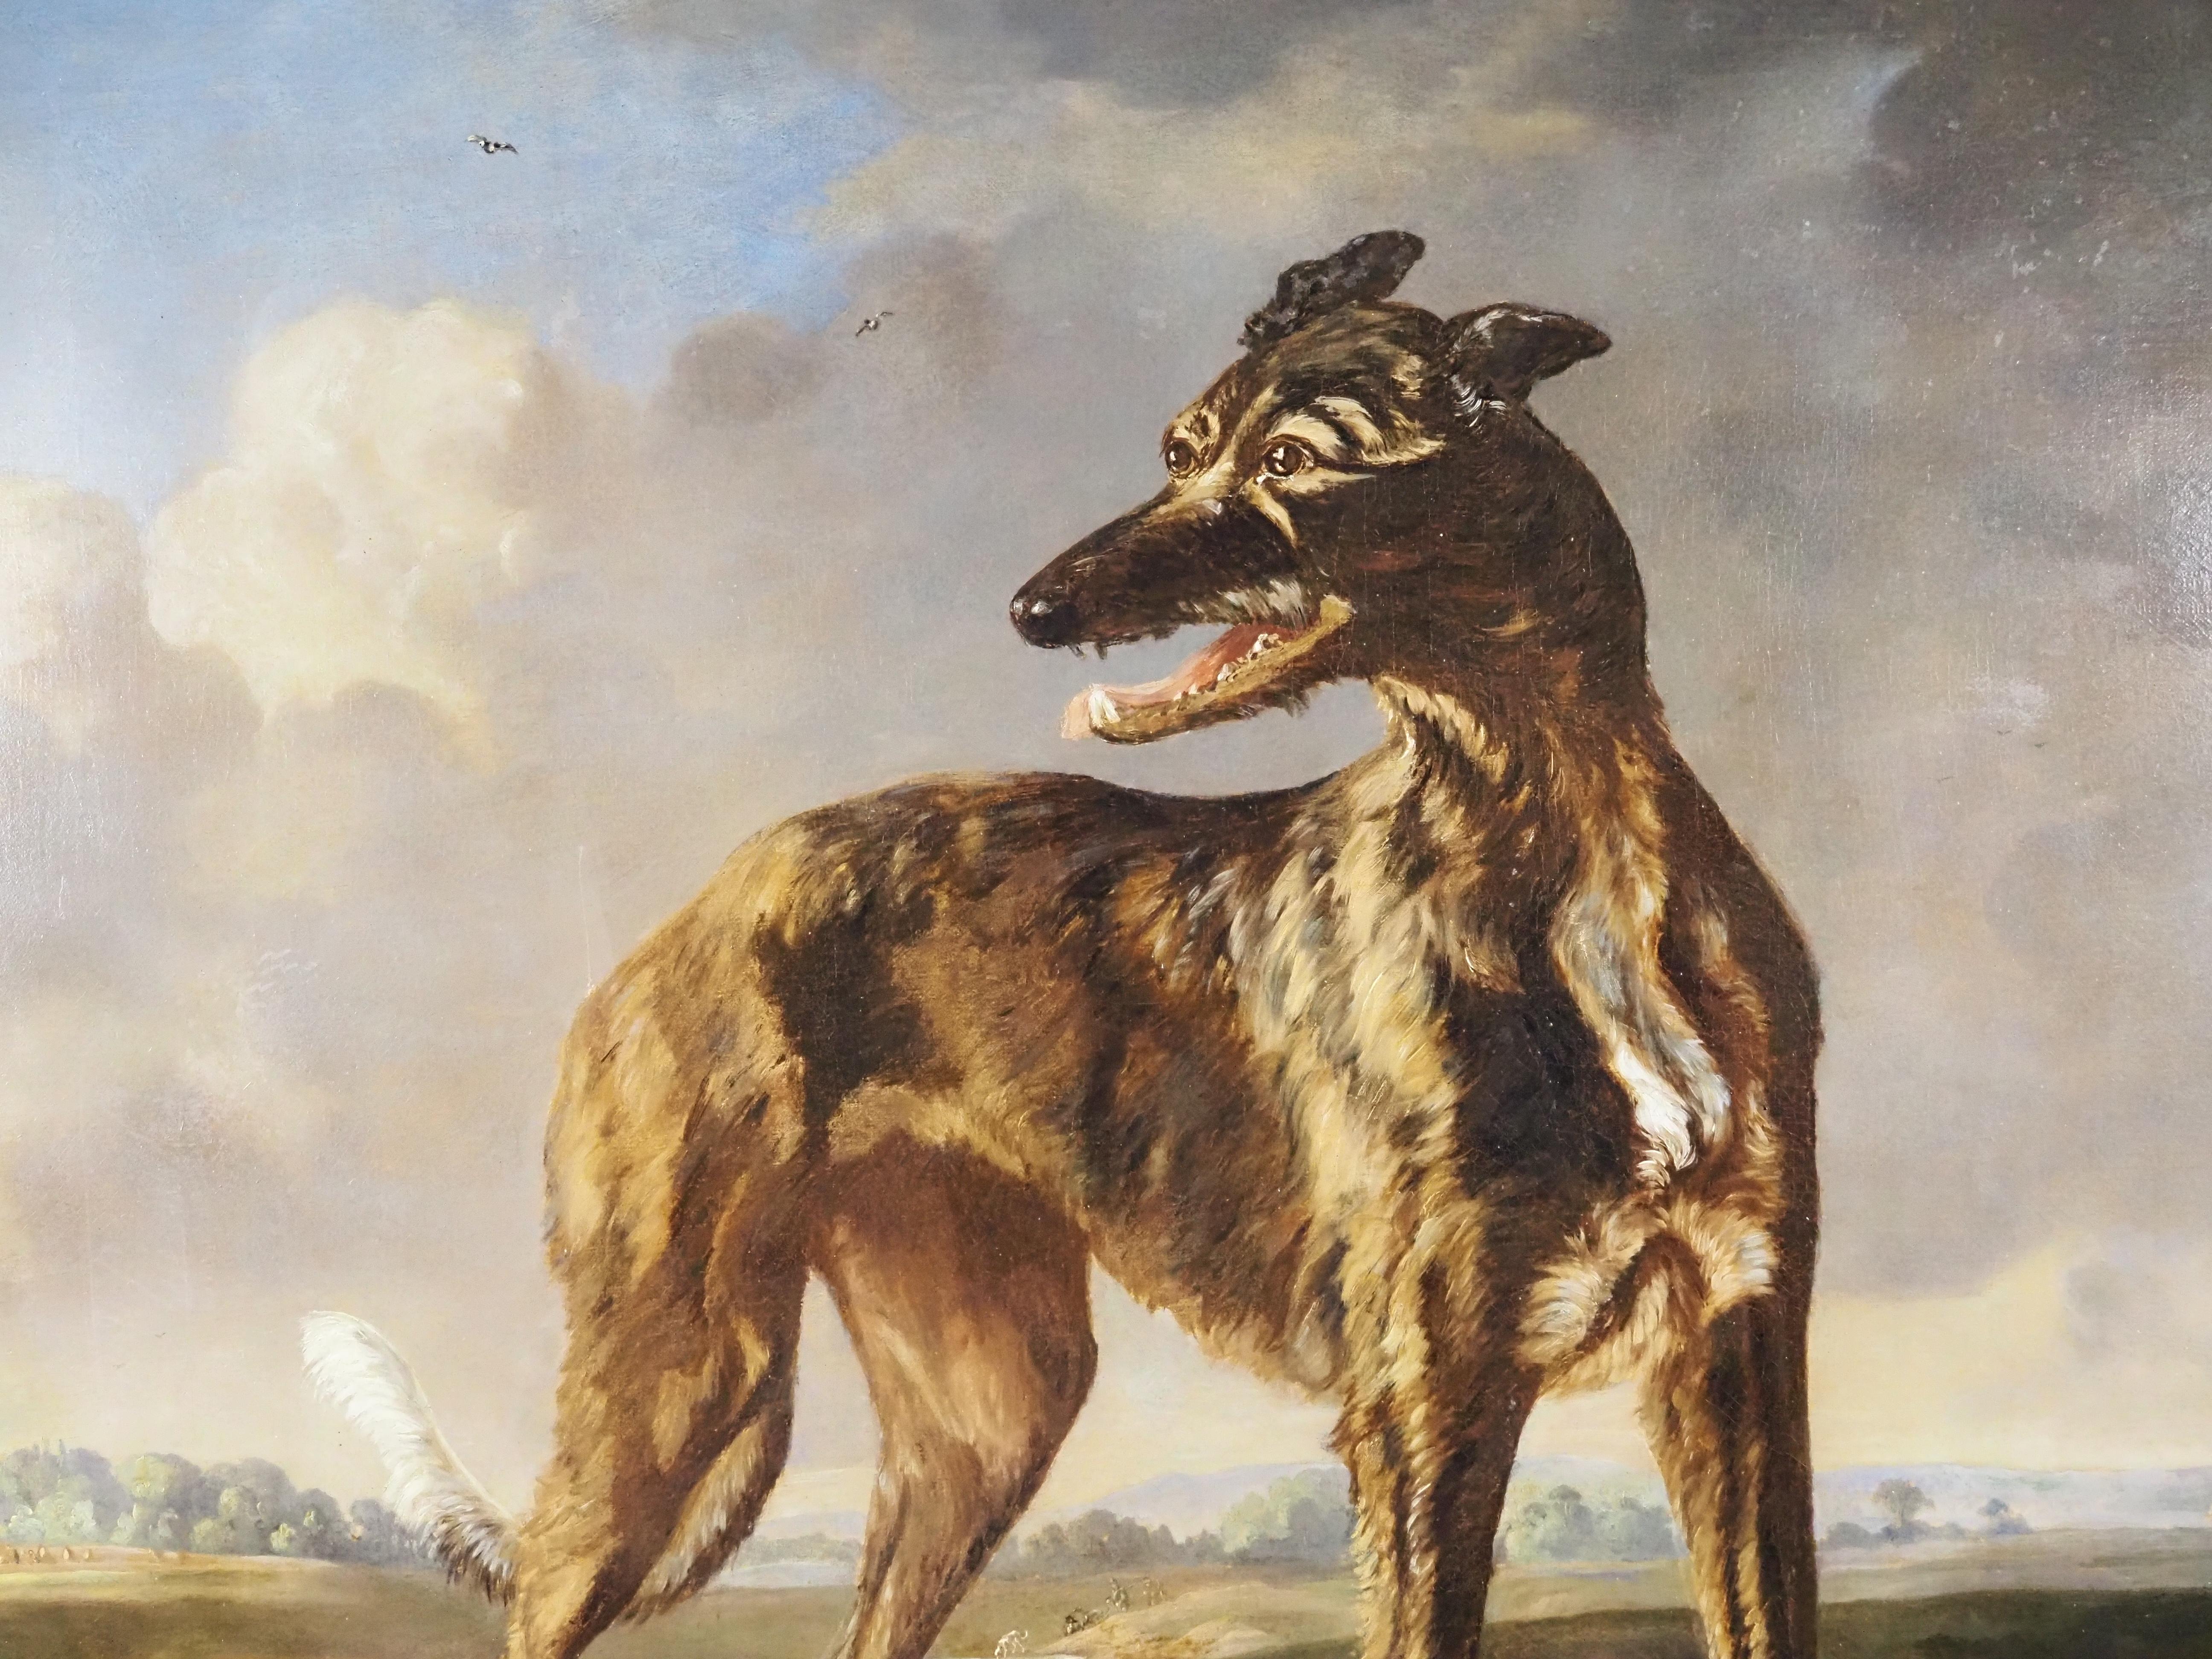 Pieter Frederick Van Os (1808-1892)
A greyhound in a landscape
Signed 'P. F: Van Os. f 1825' lower left
Oil on canvas
Canvas Size - 46 x 39 in
Framed Size - 51 x 44 in

Provenance: Christie's Amsterdam, Pictures & Drawings, 26th February 1987, Lot